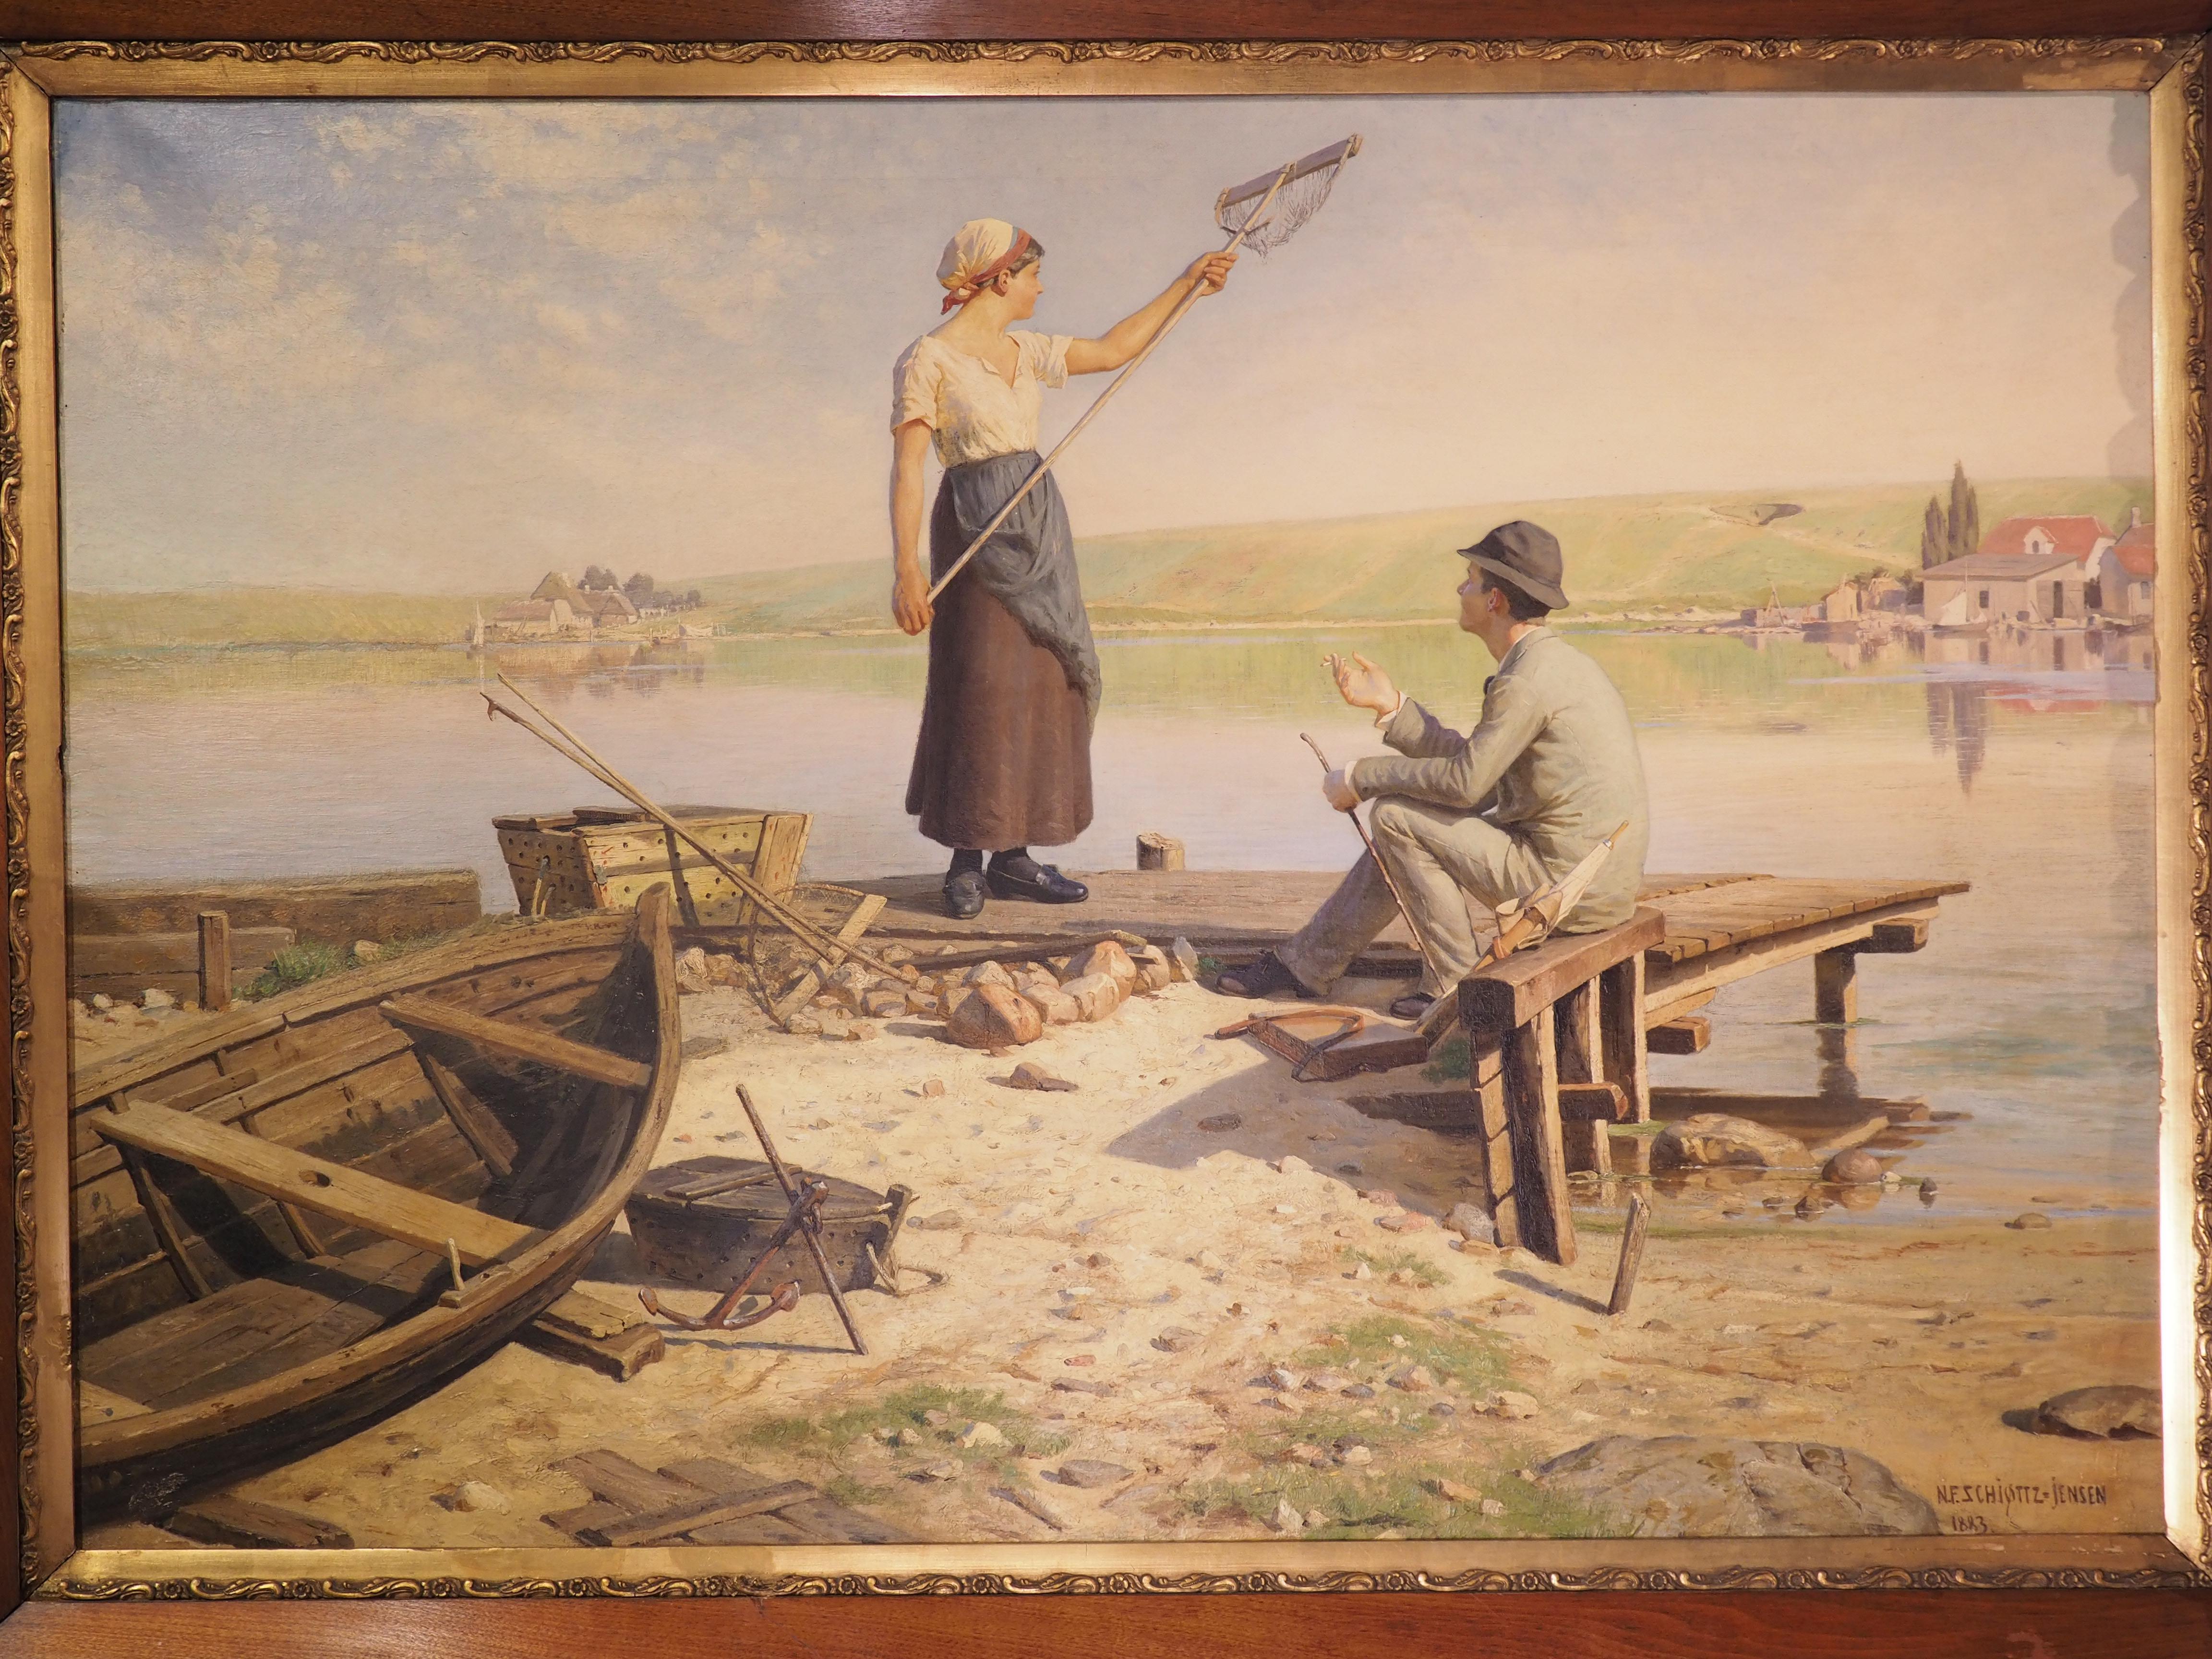 This large oil on canvas painting from Denmark depicts a woman and a man on the shore of a serene body of water. The painting is signed in the lower right corner “N. F. Schiottz-Jensen 1883” and is surrounded by a frame adorned with foliate motifs.